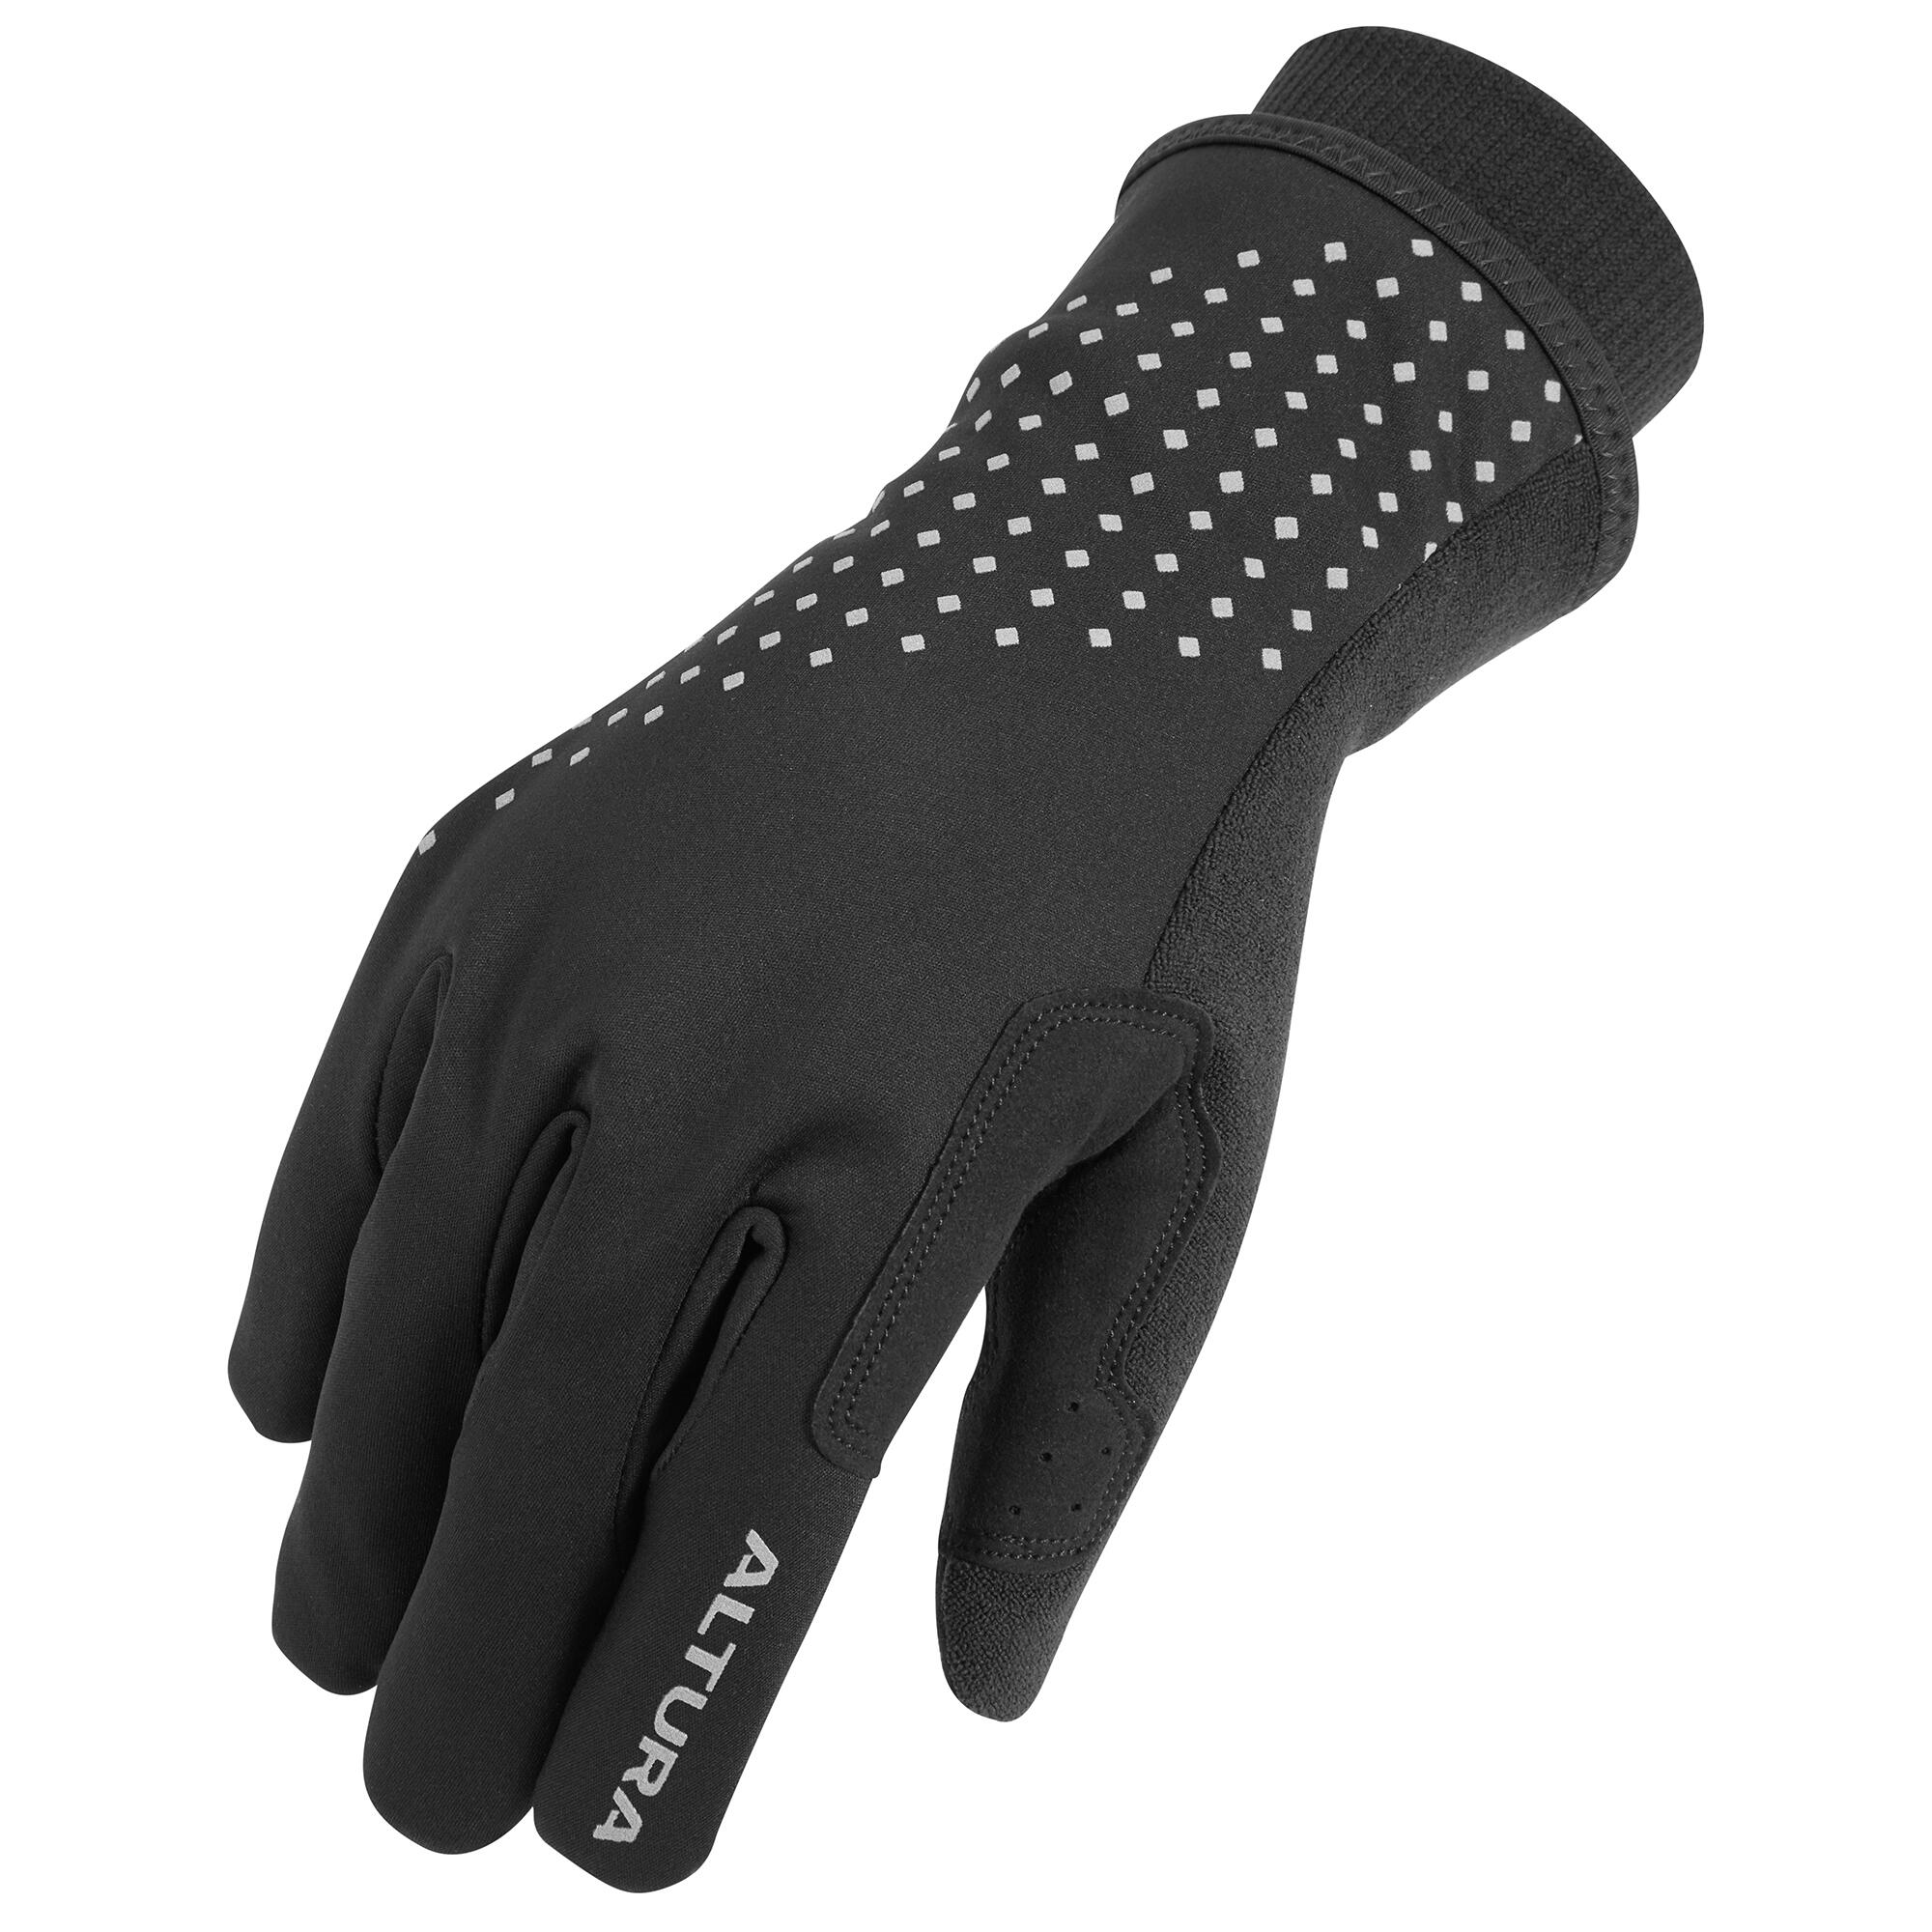 Nightvision Unisex Waterproof Insulated Cycling Gloves 1/6